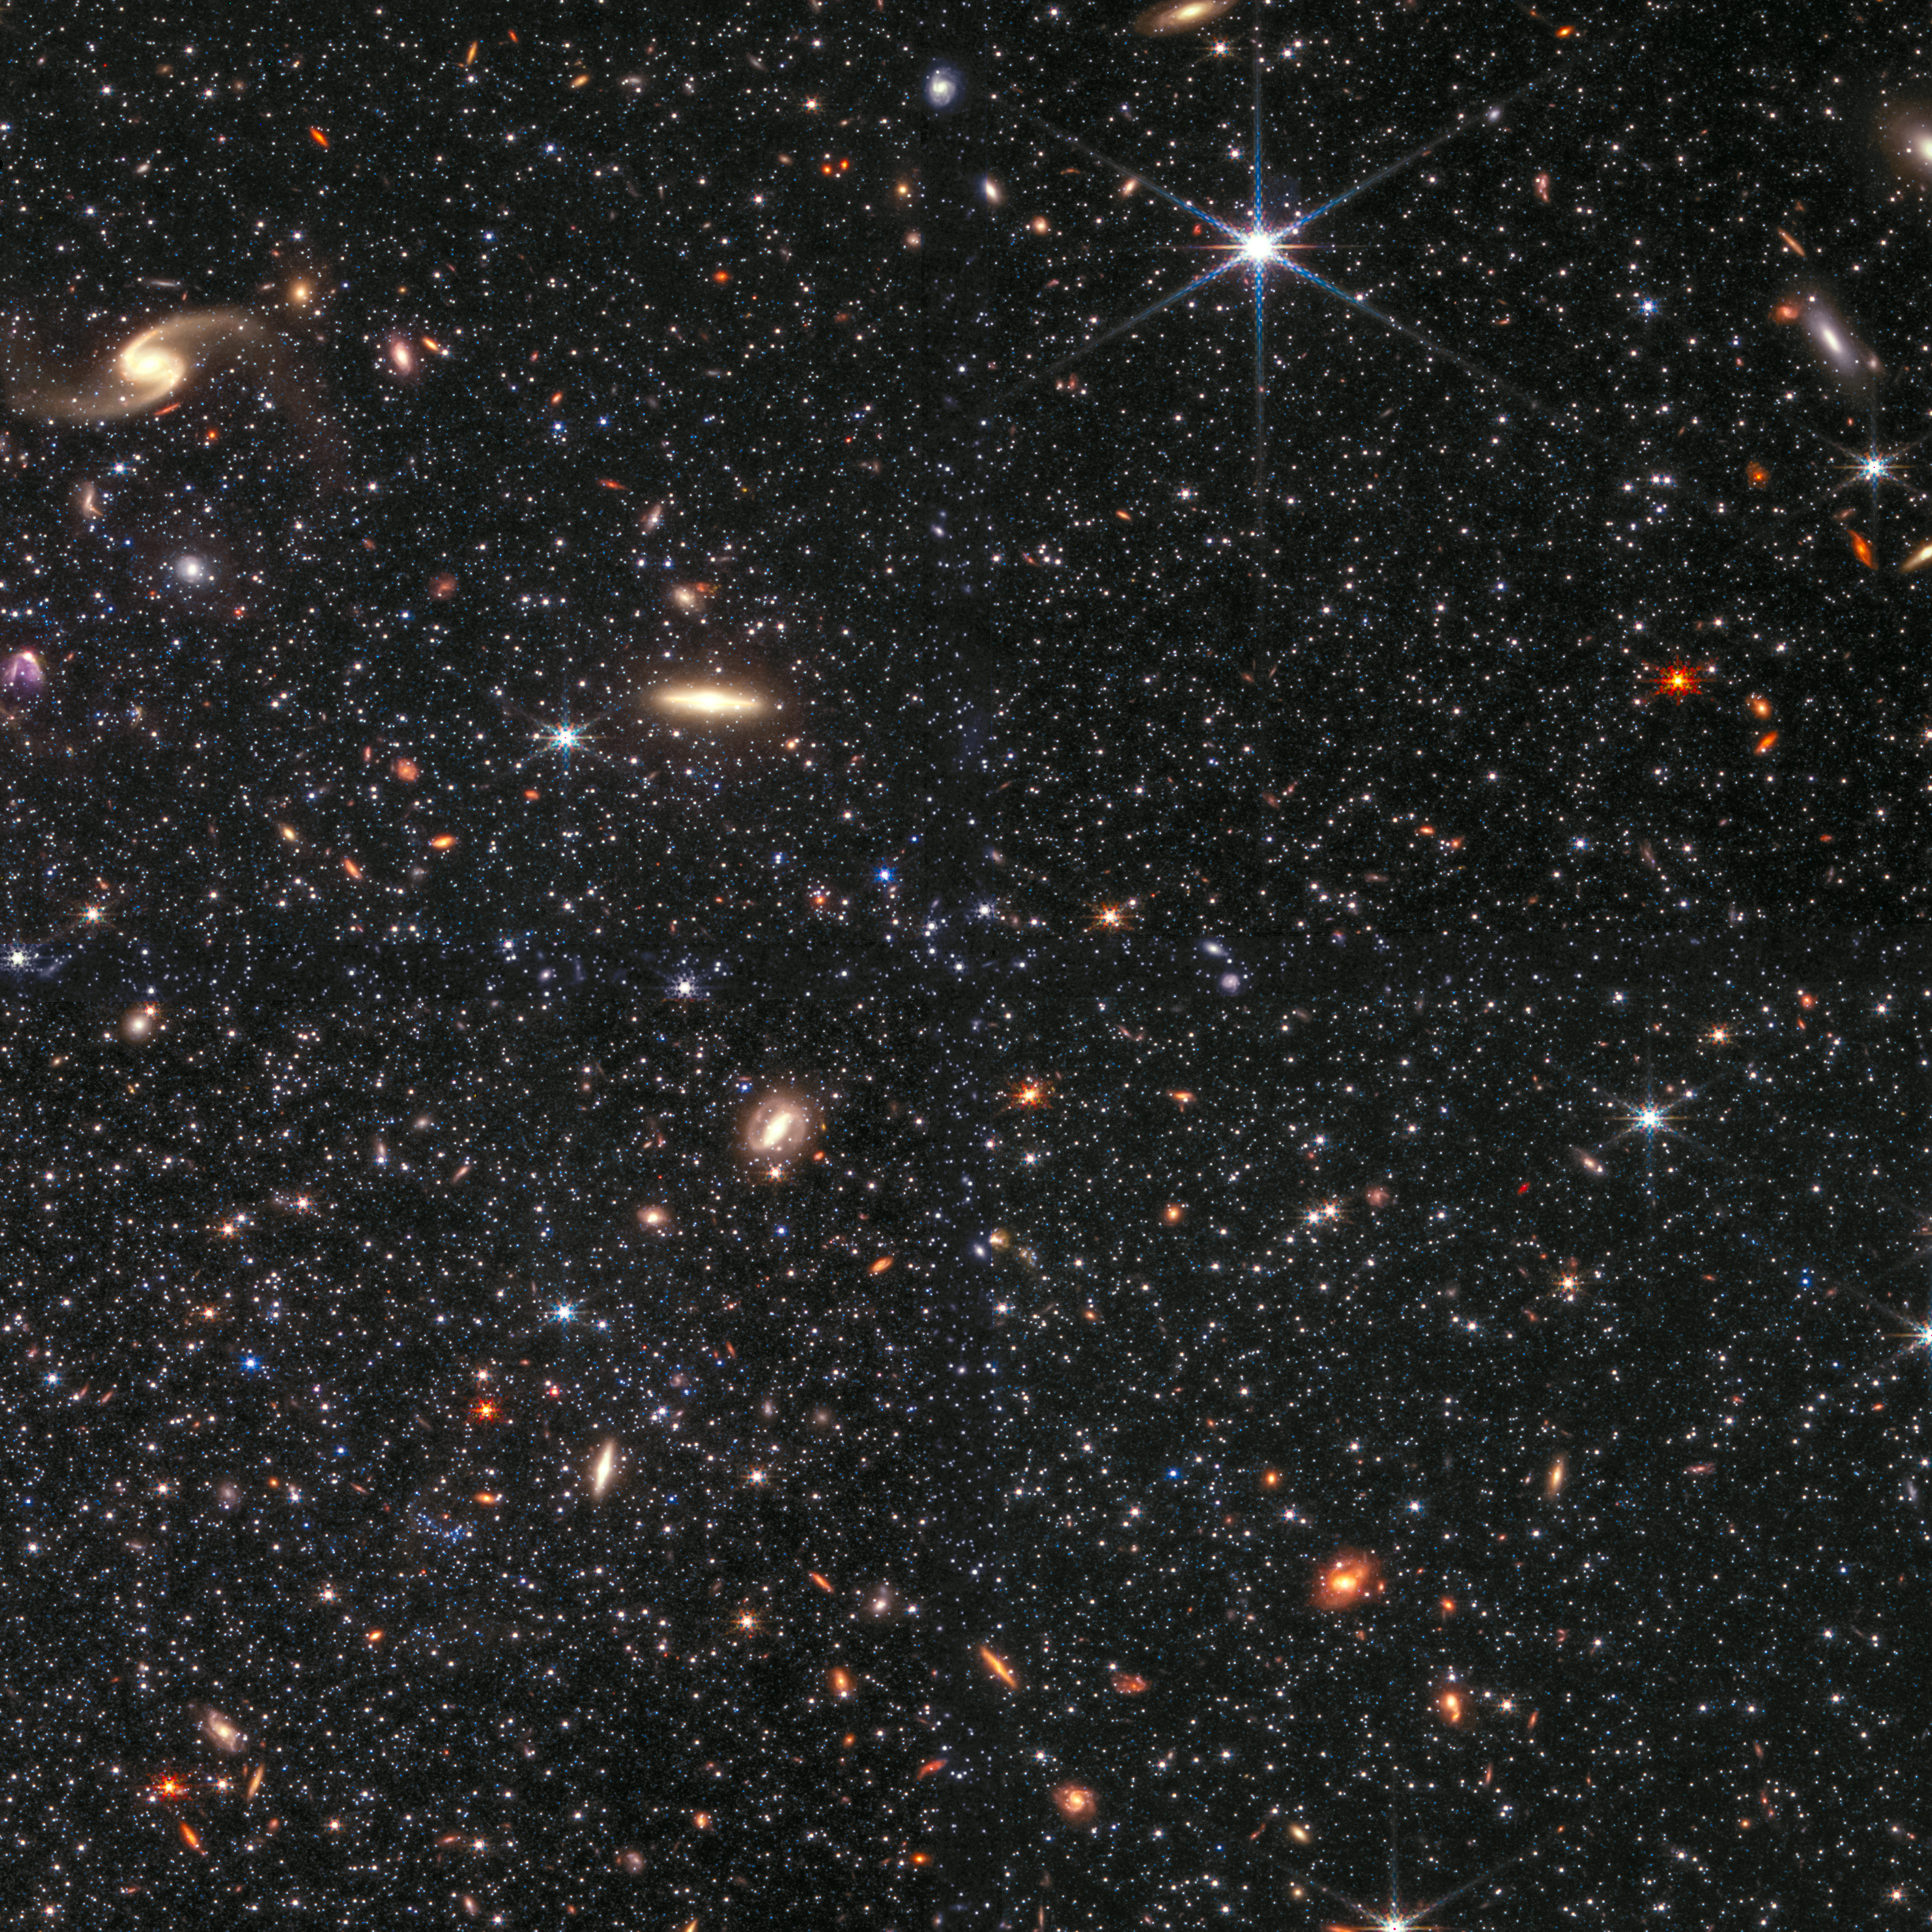 A portion of the dwarf galaxy Wolf–Lundmark–Melotte (WLM) captured by the James Webb Space Telescope’s Near-Infrared Camera. The image demonstrates Webb’s remarkable ability to resolve faint stars outside the Milky Way. Color translation: 0.9-micron light is shown in blue, 1.5-micron in cyan, 2.5-micron in yellow, and 4.3-micron in red (filters F090W, F150W, F250M, and F430M). Image: NASA, ESA, CSA, Kristen McQuinn (RU) / Zolt G. Levay (STScI)